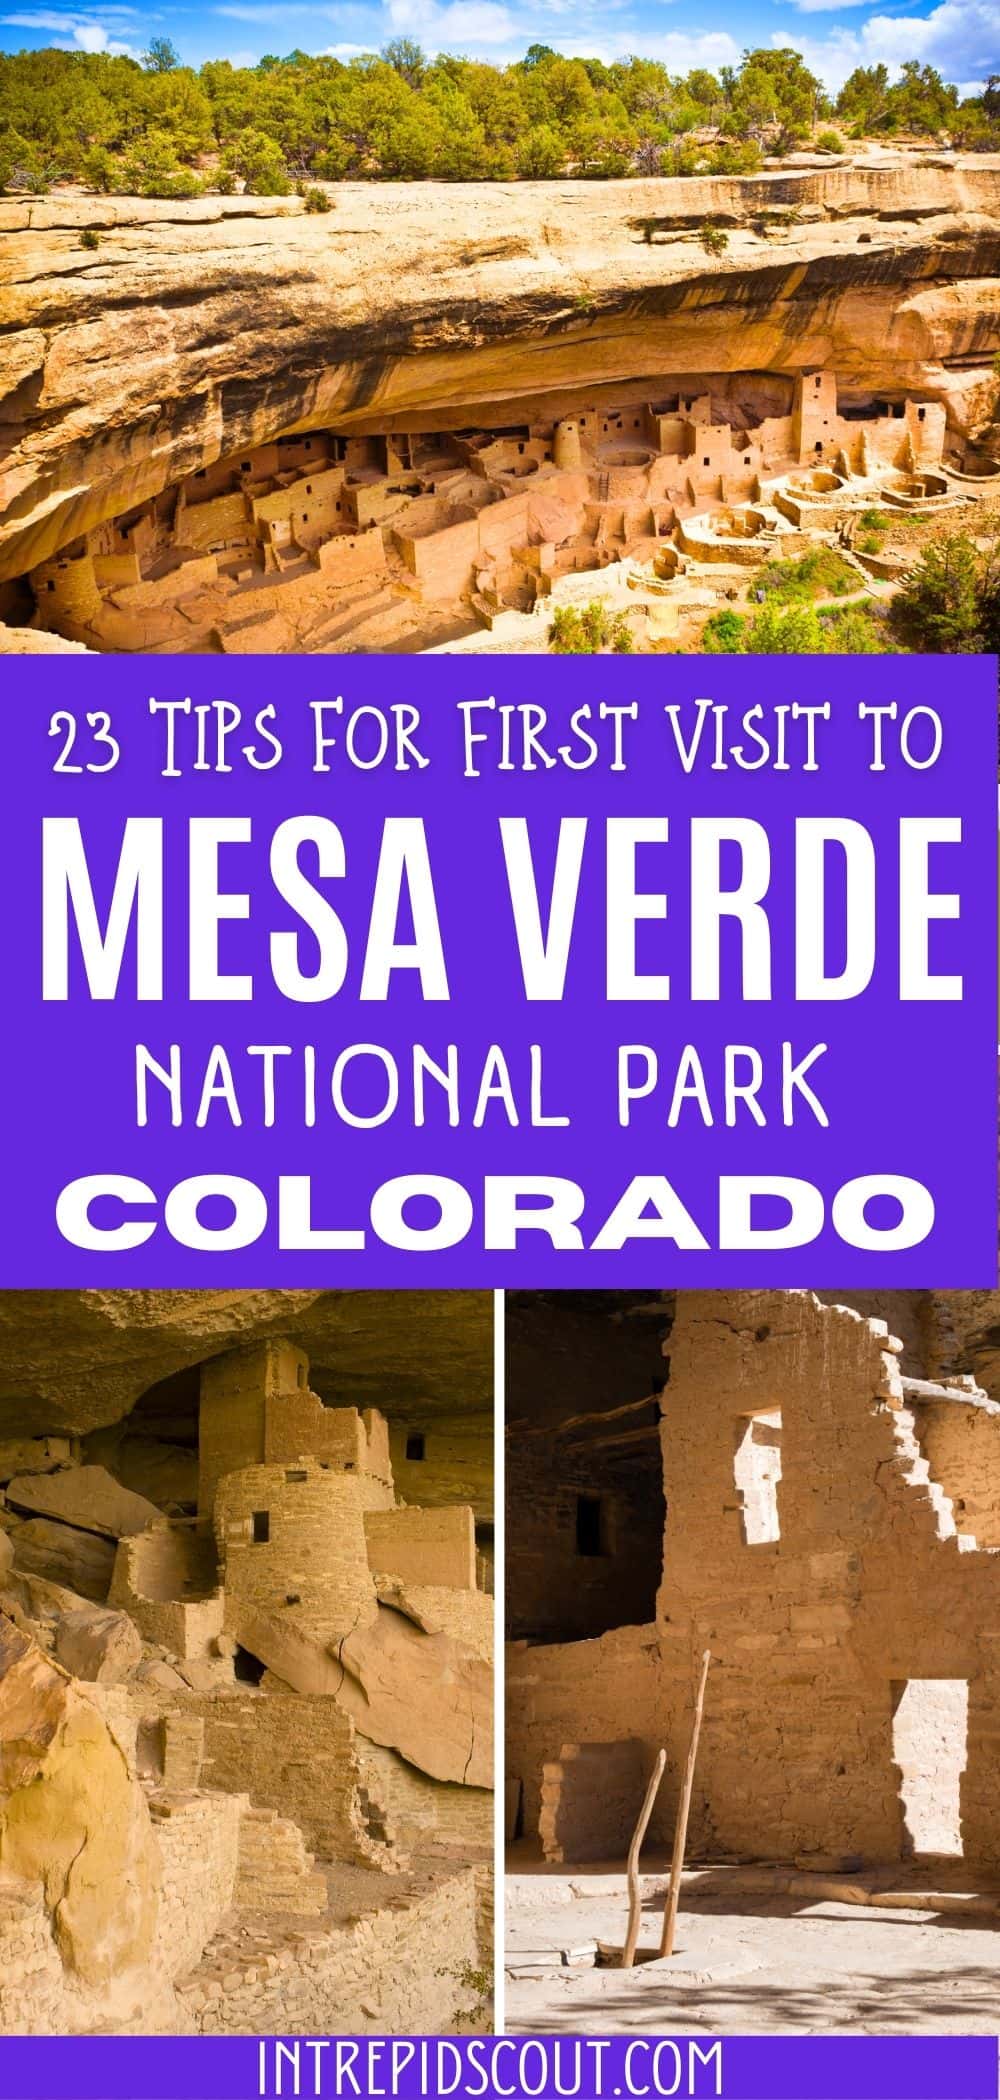 Tips for First Visit to Mesa Verde